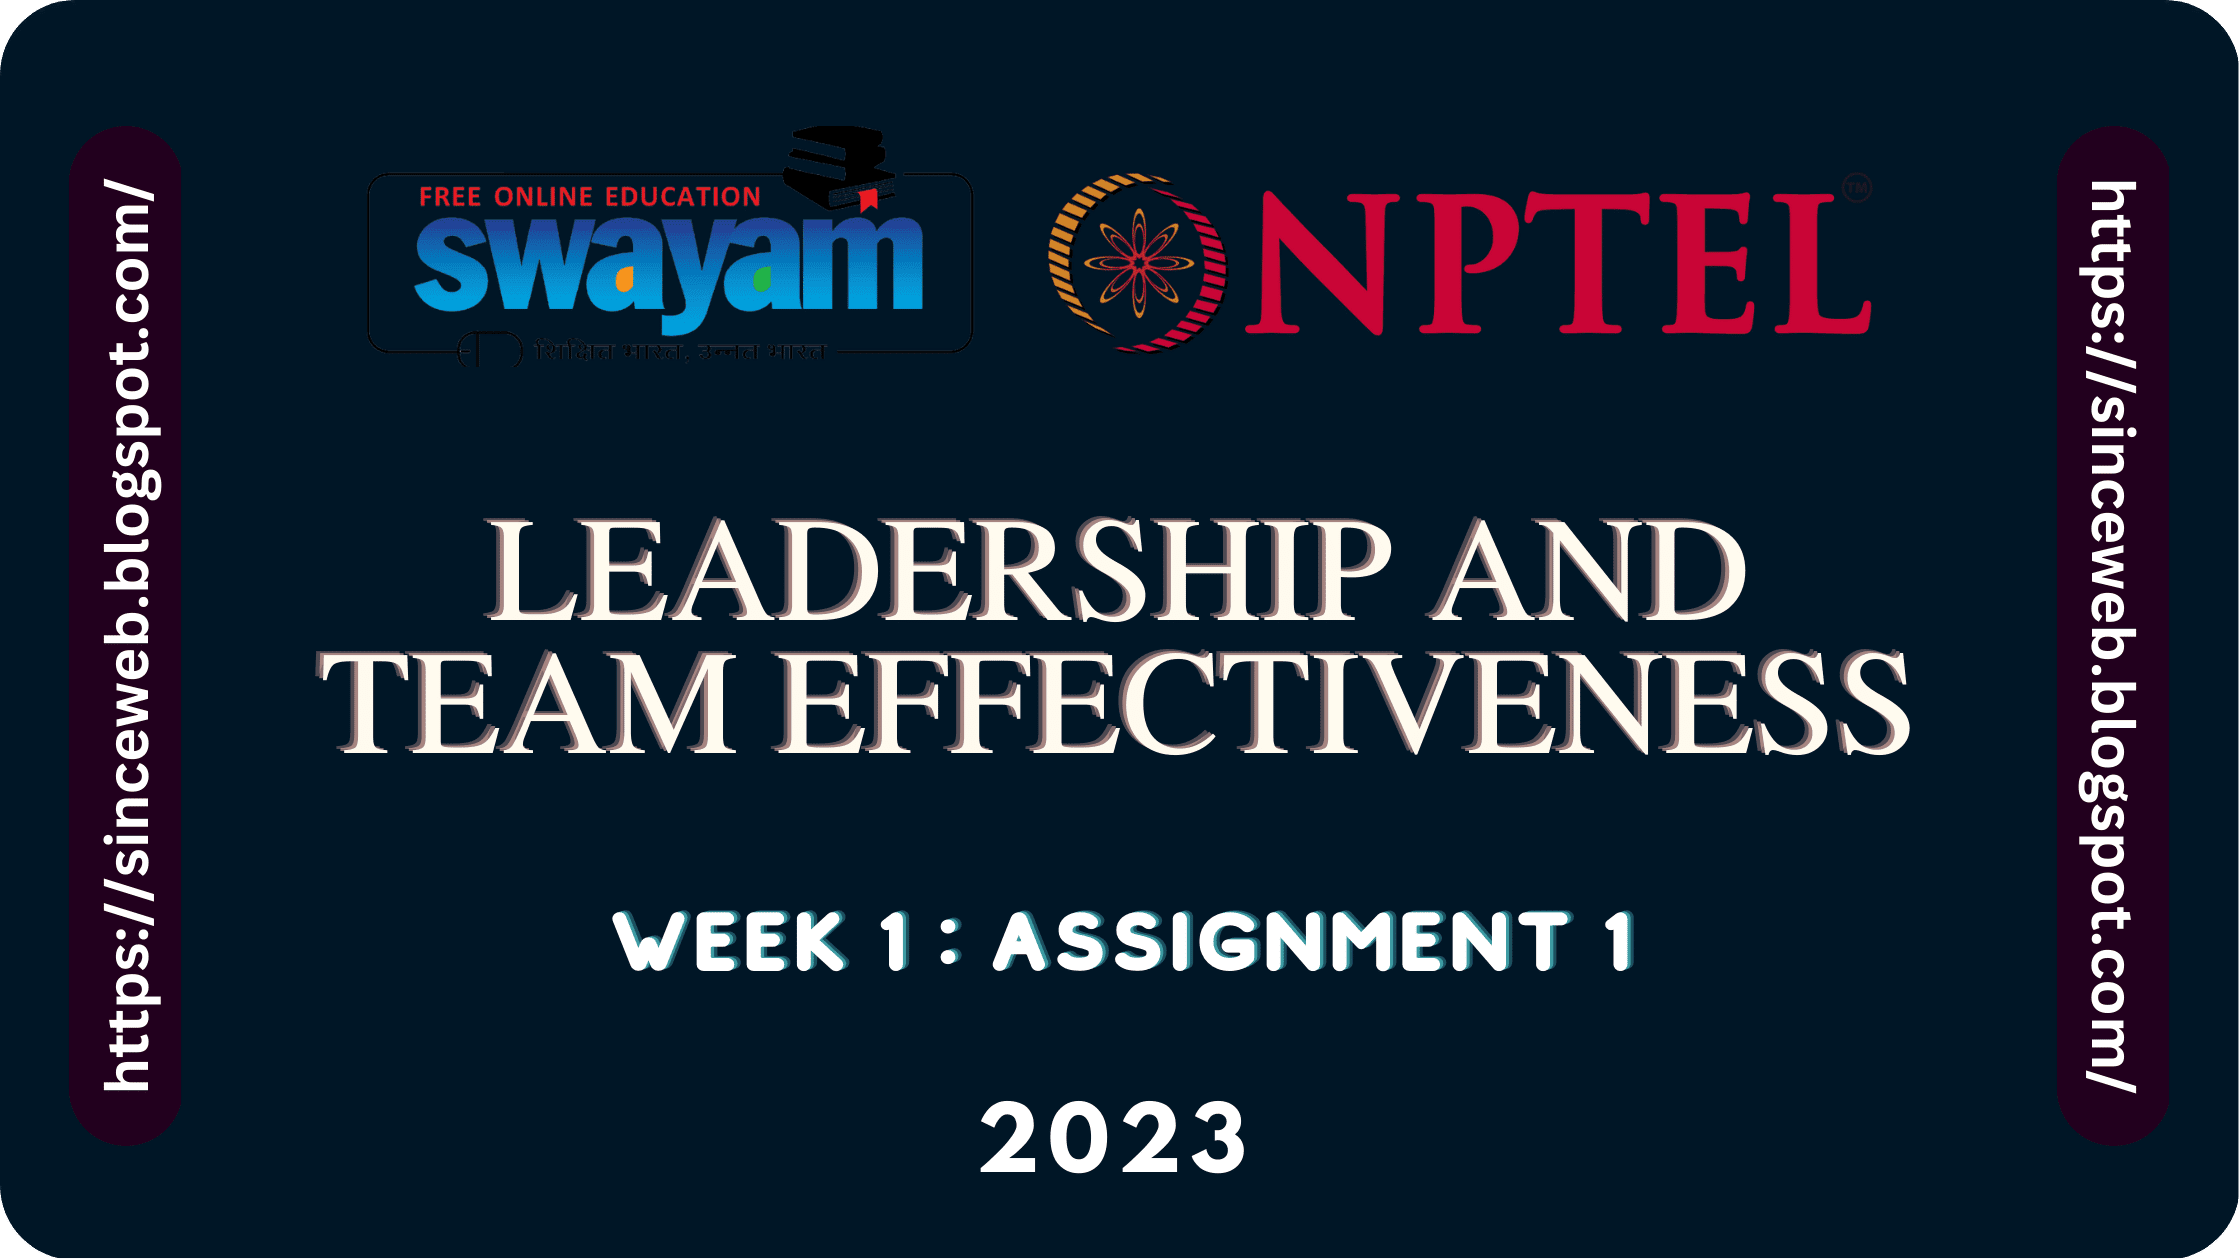 NPTEL Leadership and Team Effectiveness Week 1 Assignment 1 Answers 2023,Leadership and team effectiveness refer to the ability of a leader or a team